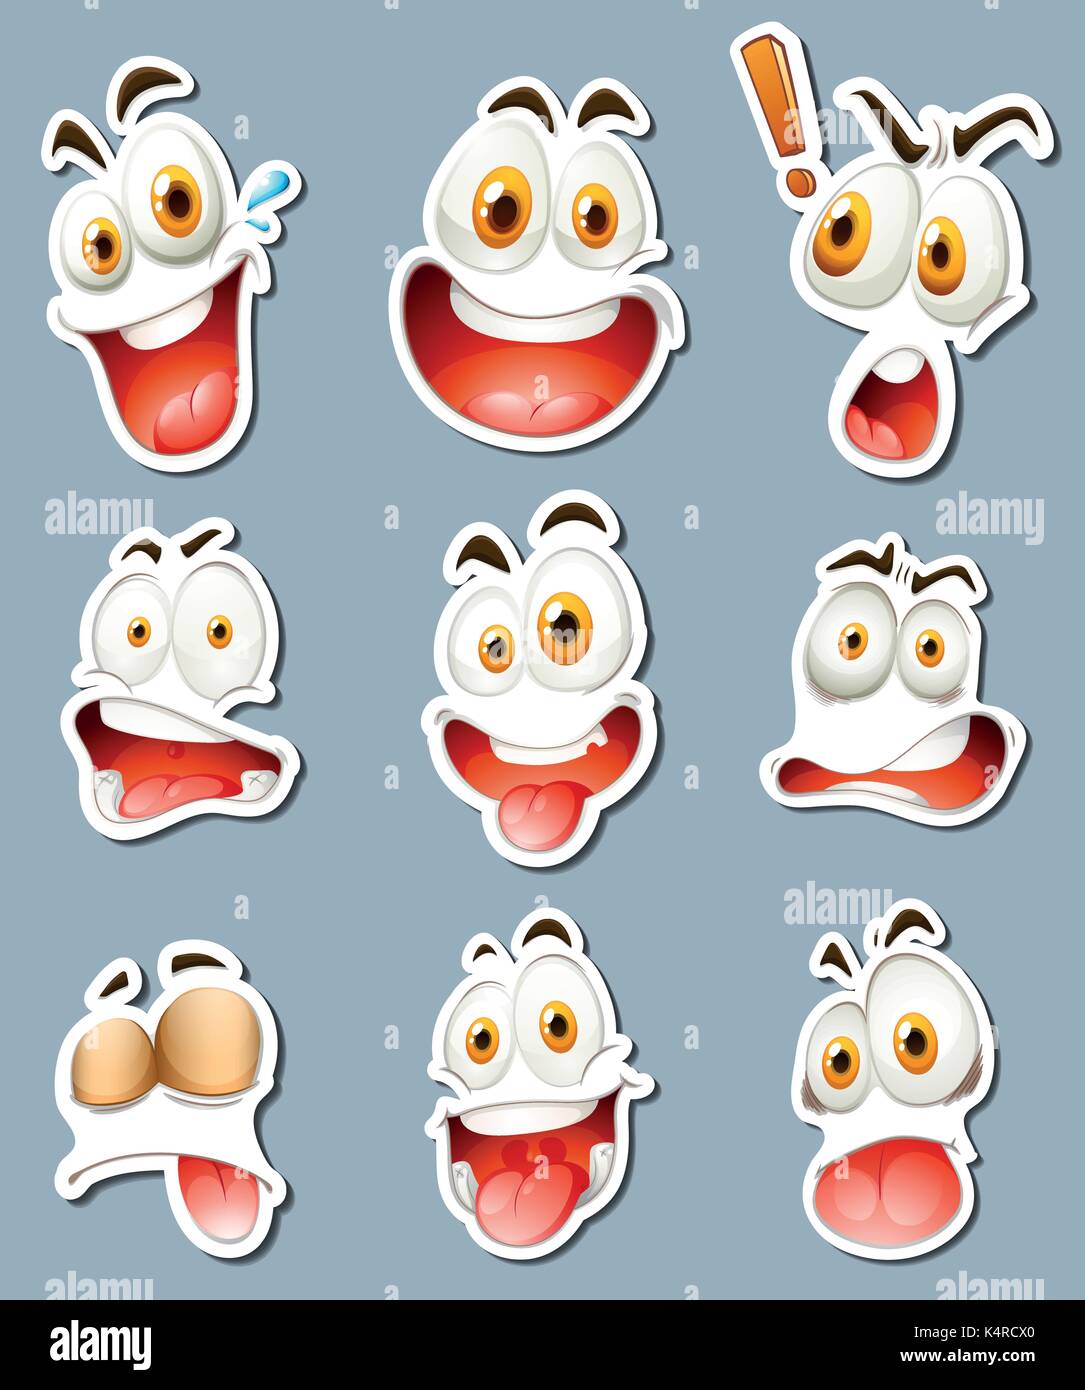 Sticker design for facial expressions illustration Stock Vector